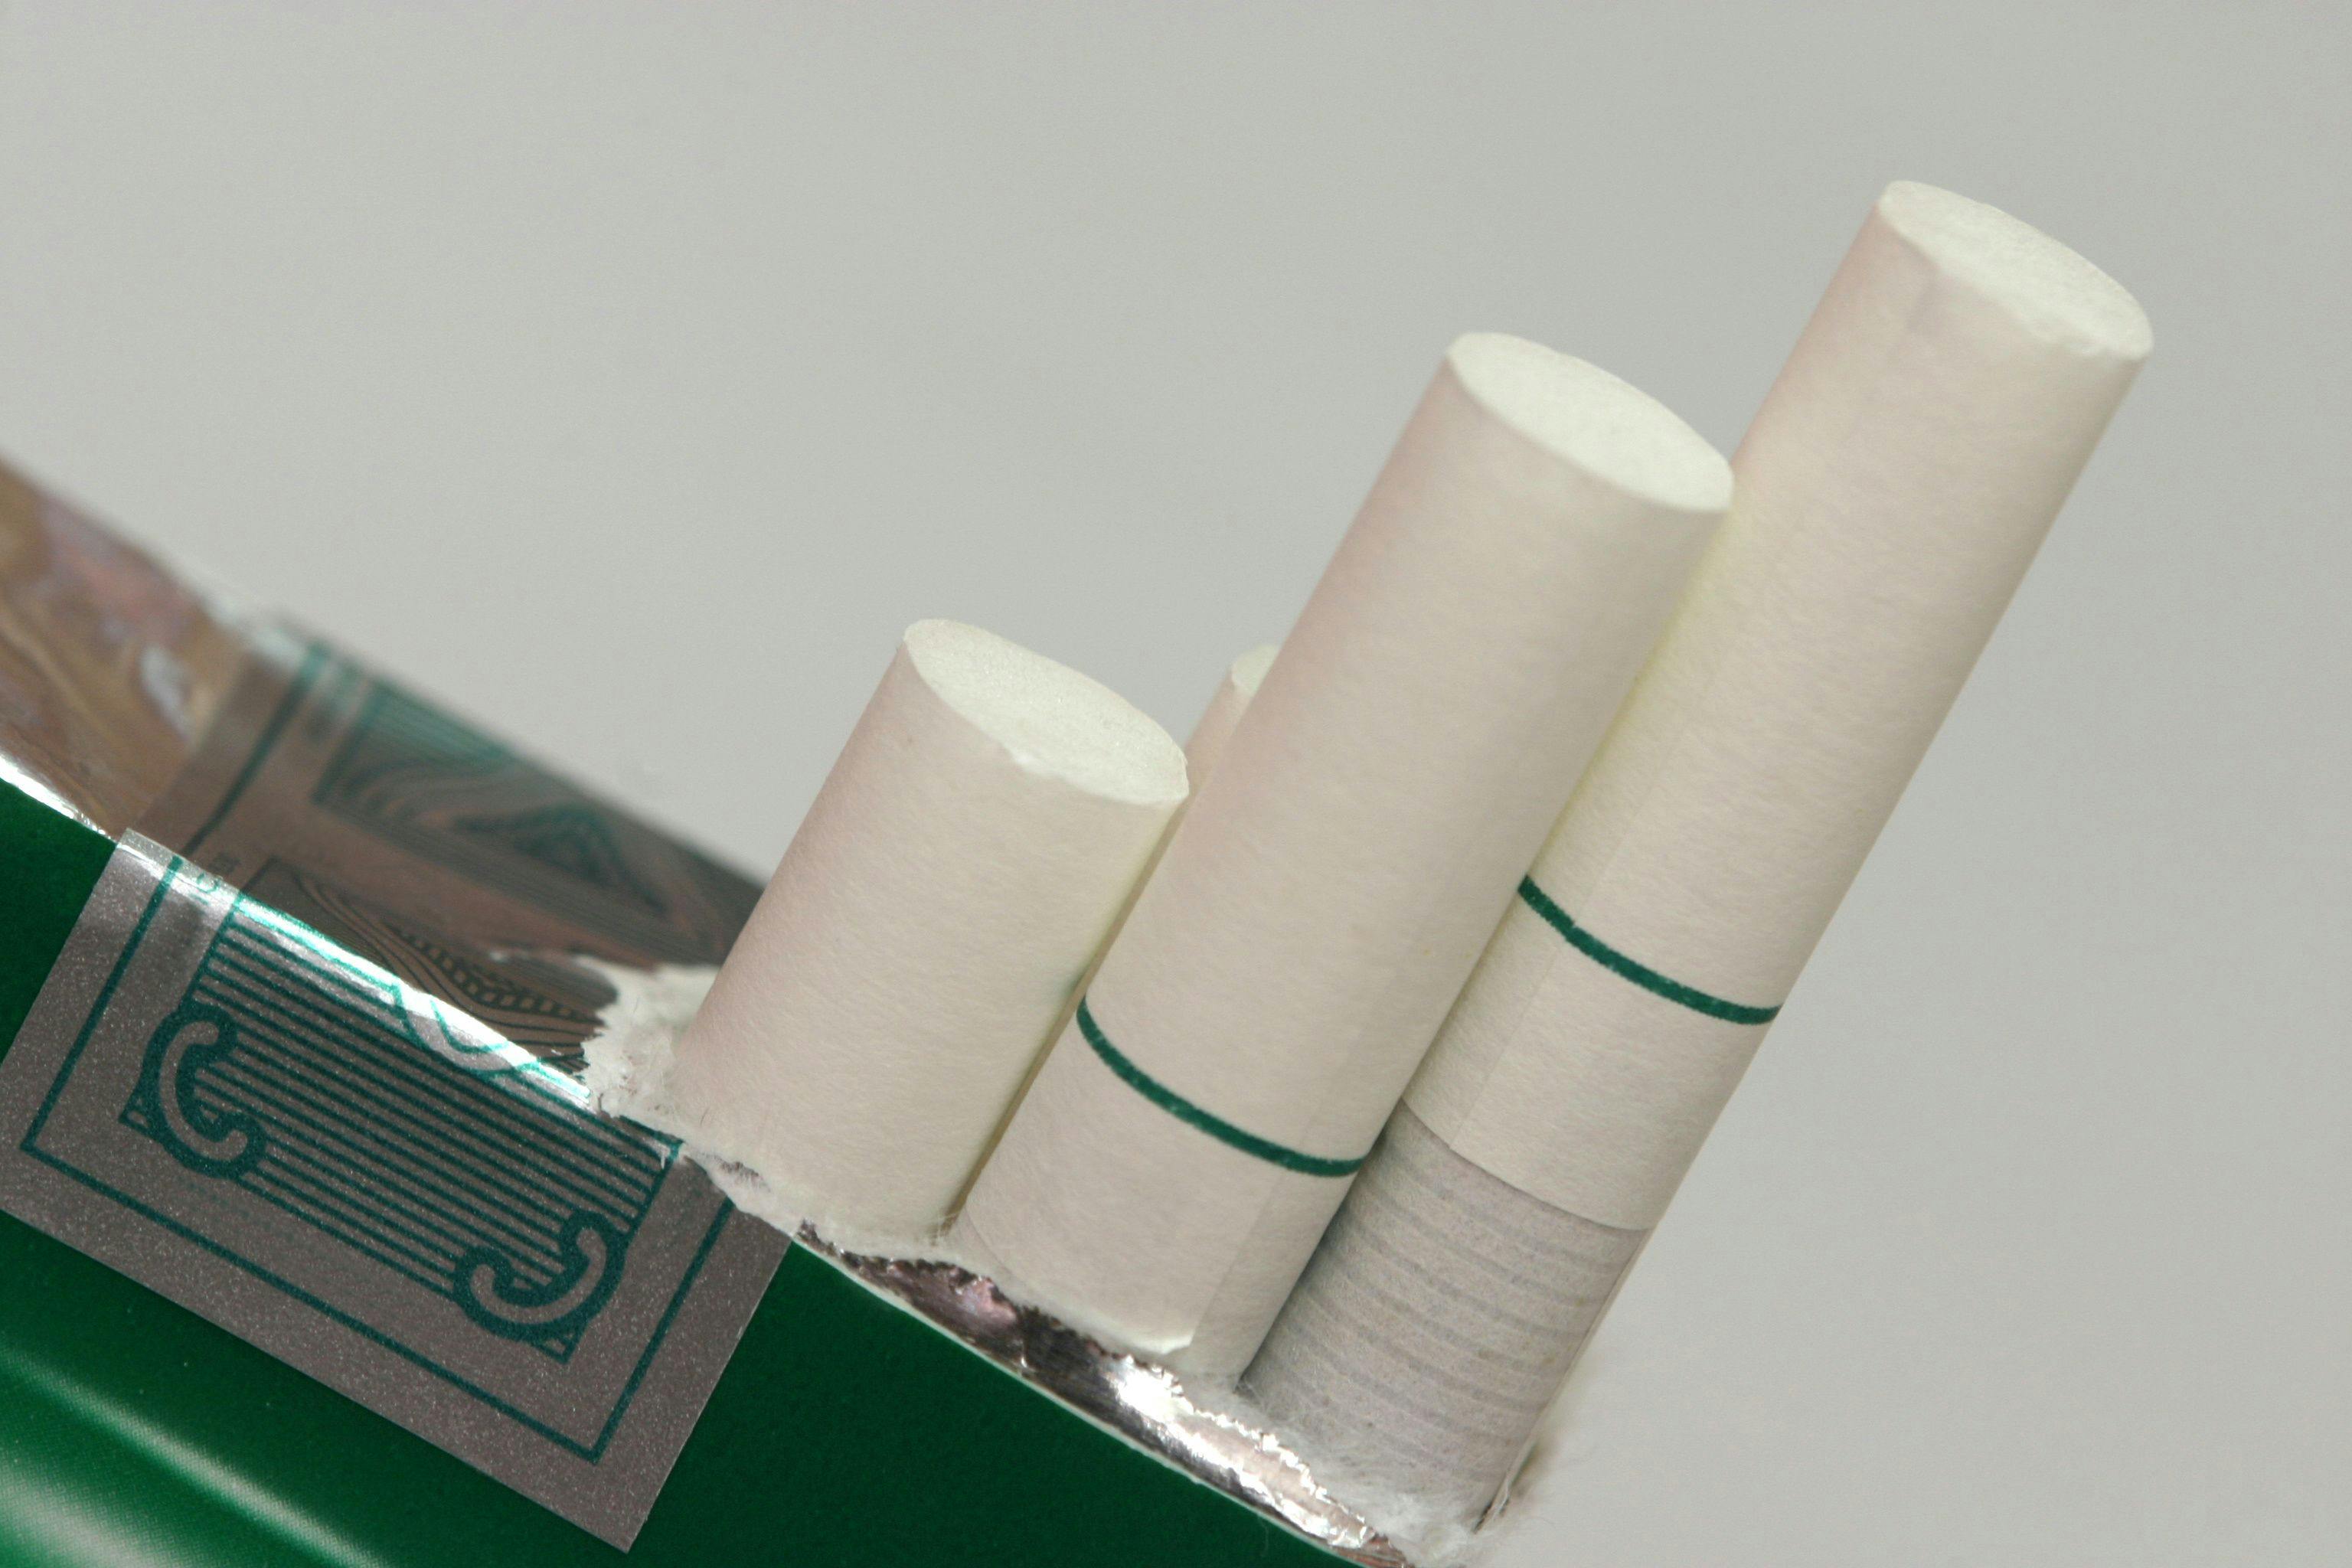 How the Menthol Cigarette Ban May Affect the African American Smoking Paradox